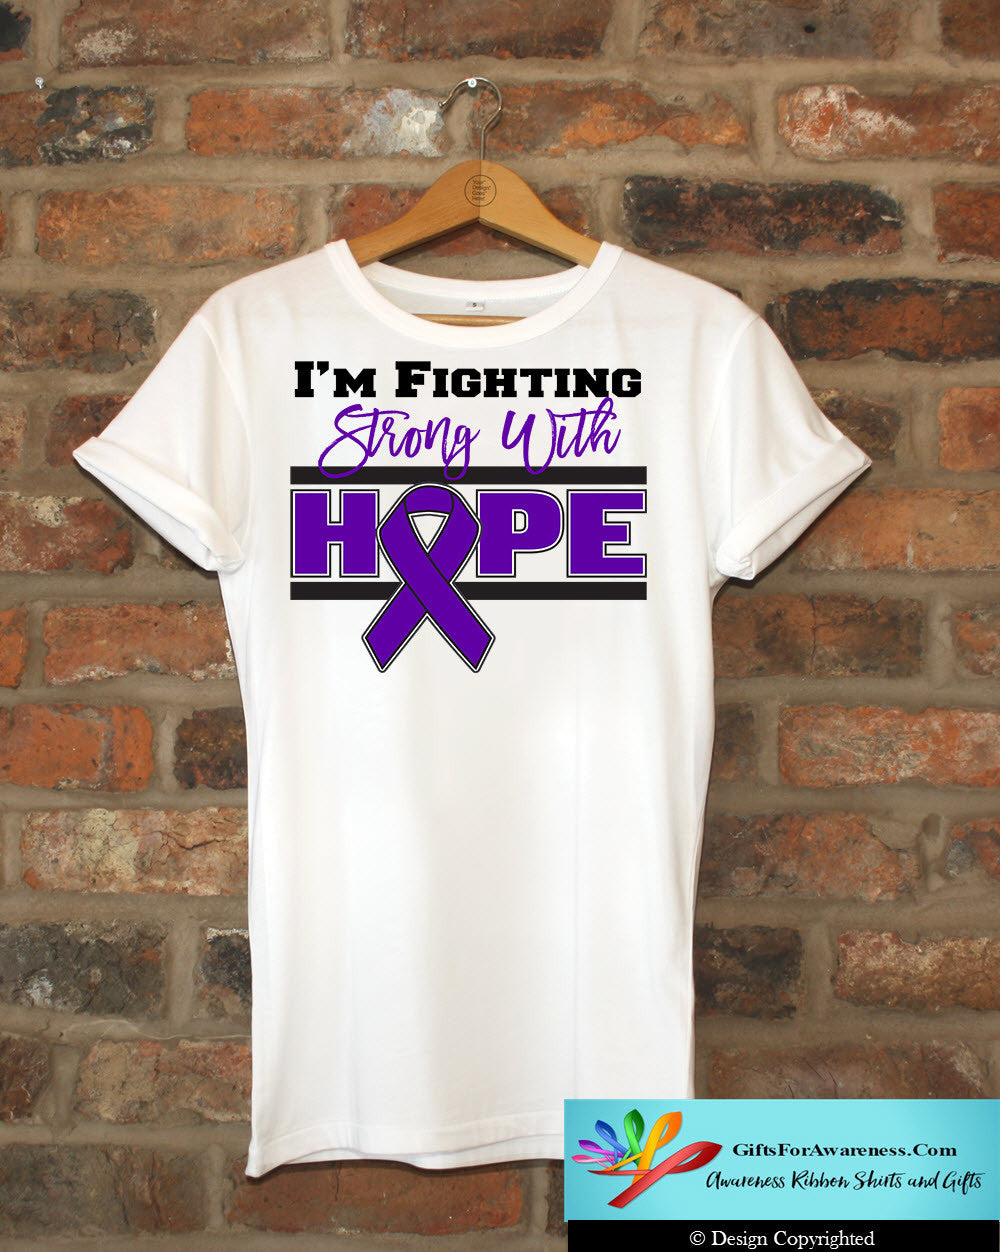 Pancreatic Cancer I'm Fighting Strong With Hope Shirts - GiftsForAwareness